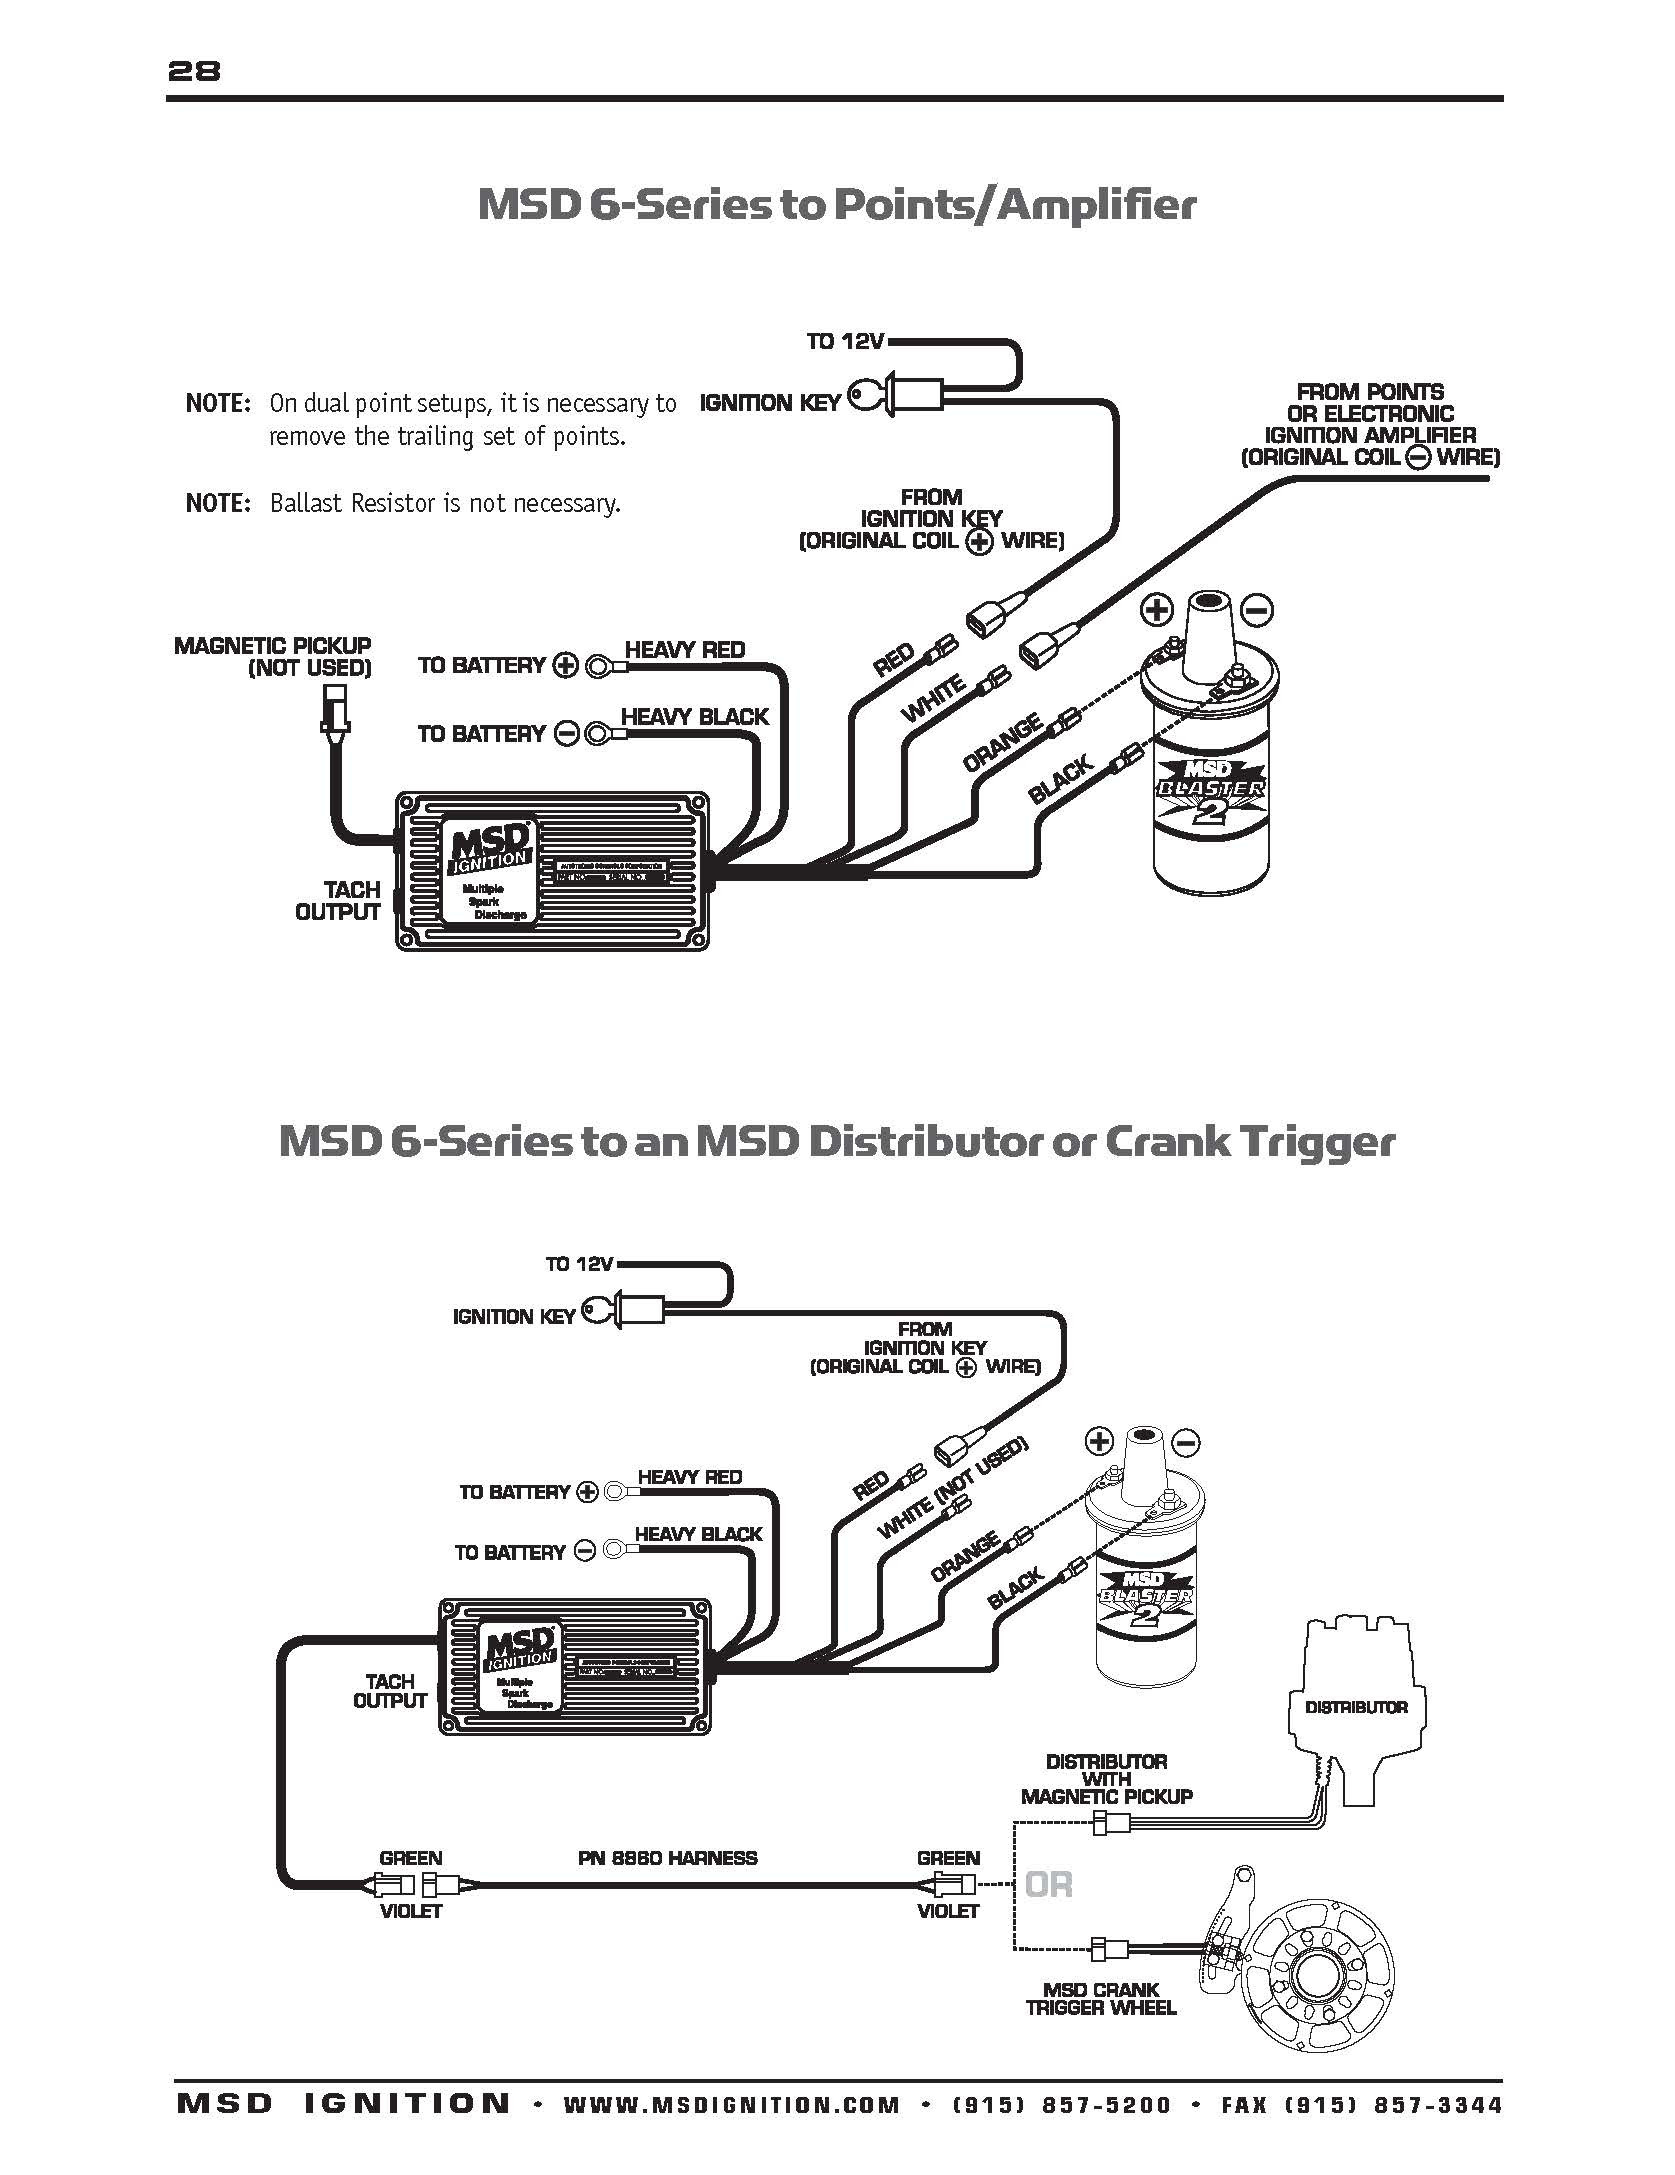 Wiring Diagram For And Accel Distributor Mallory Ignition Throughout - Mallory Ignition Wiring Diagram